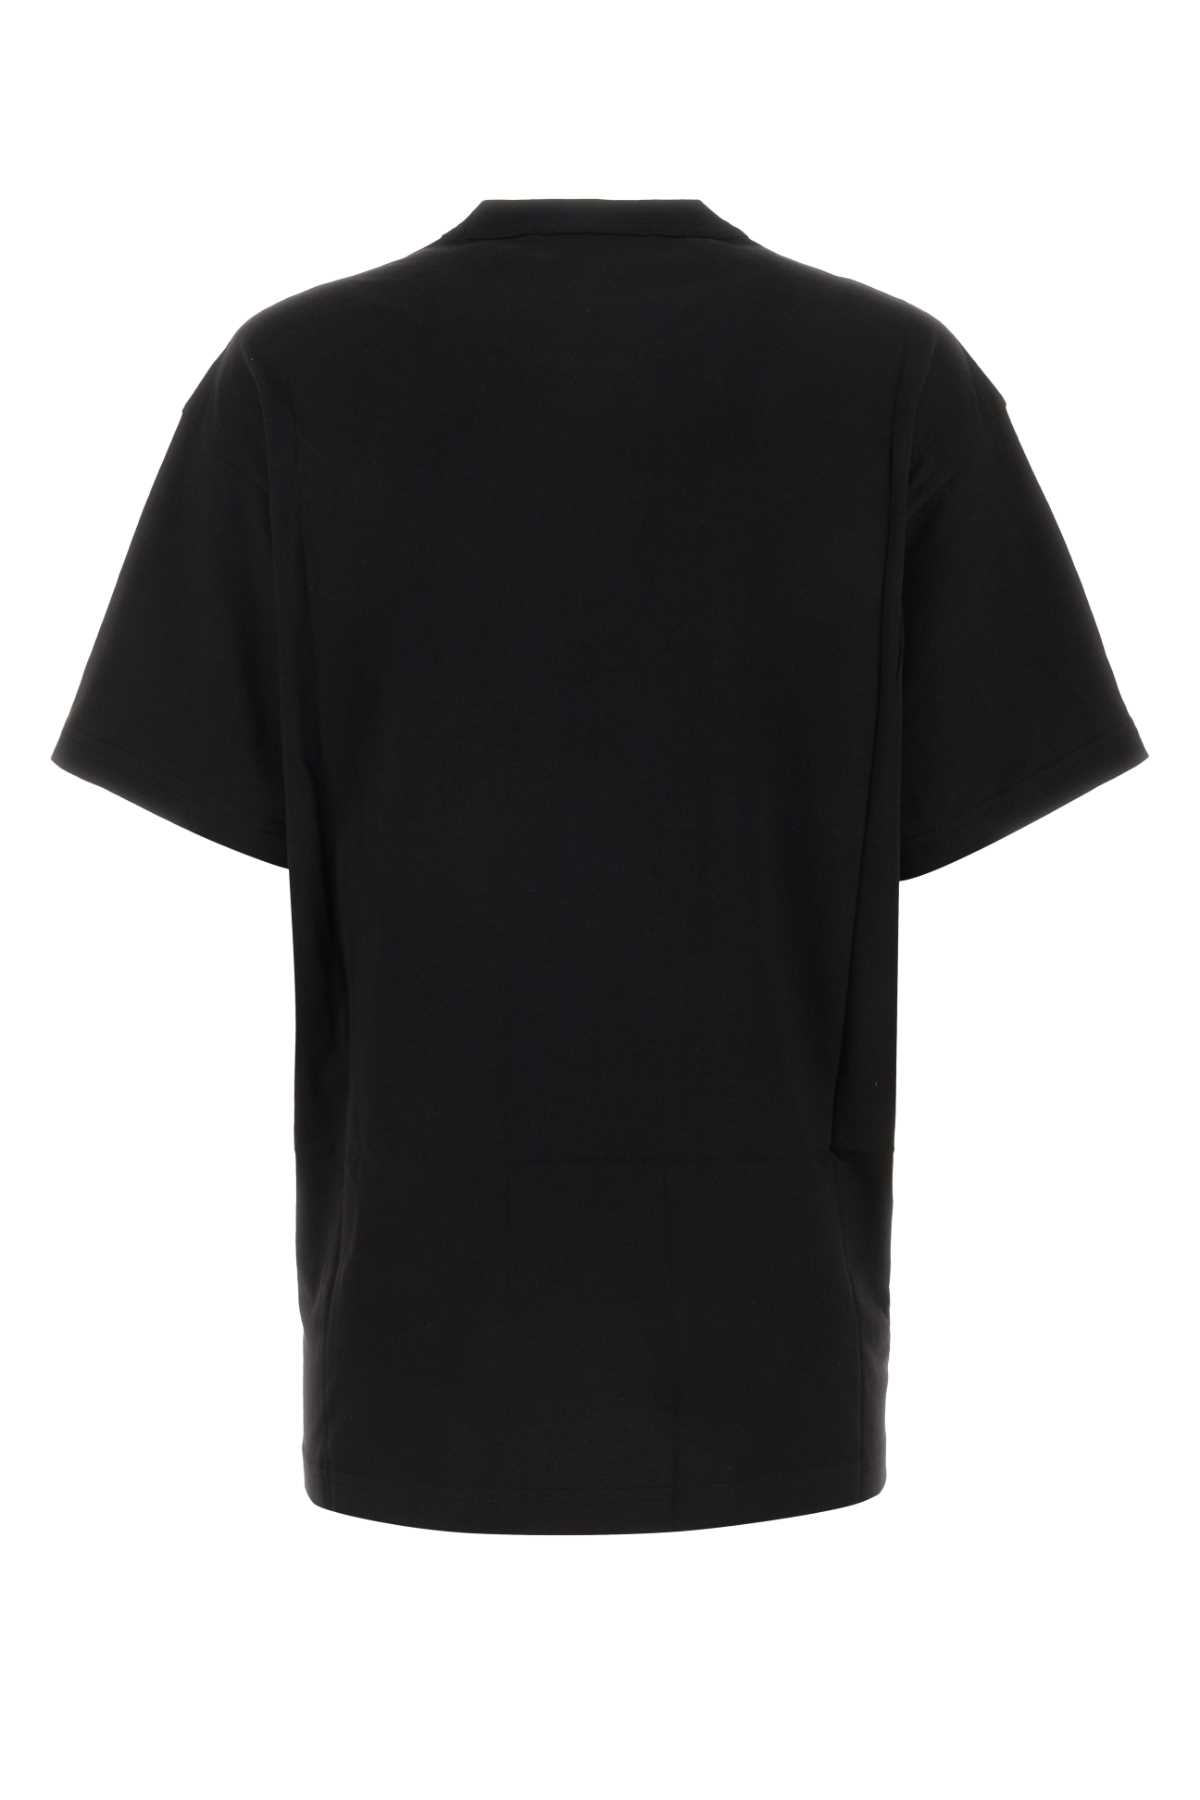 Versace Jeans Couture Black Cotton T-shirt In G89